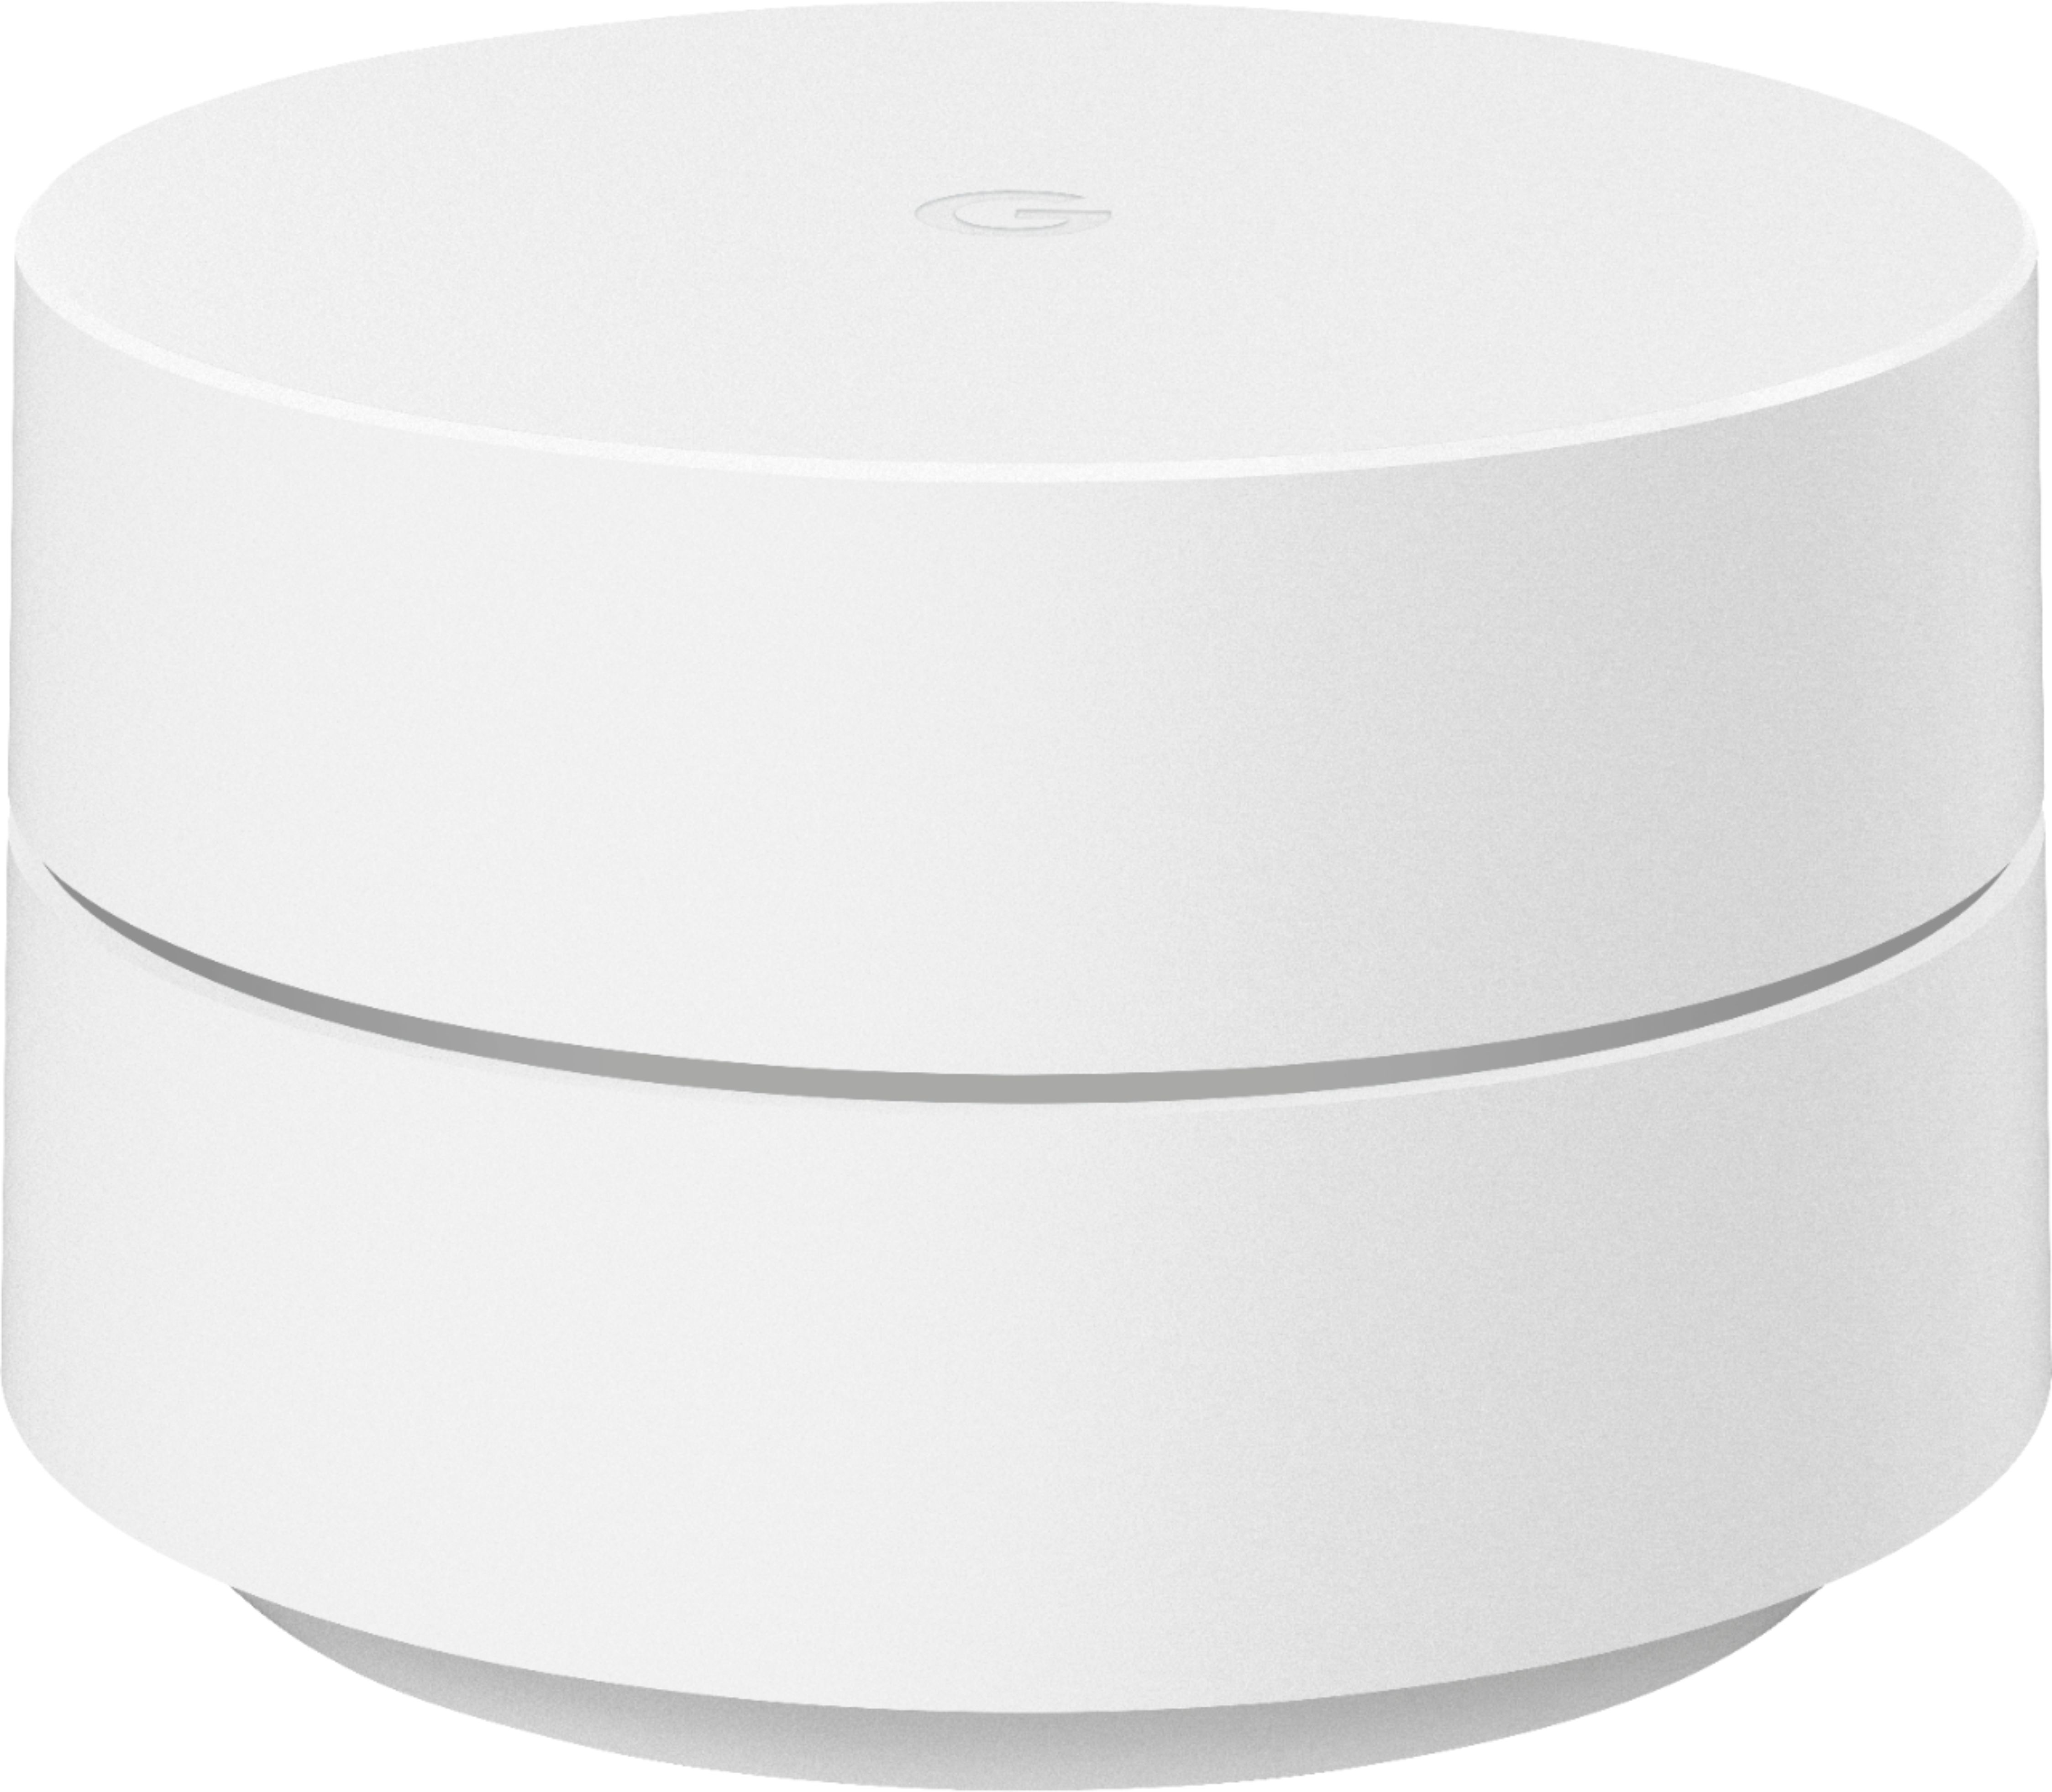 Left View: Google - Geek Squad Certified Refurbished AC1200 Dual-Band Mesh Wi-Fi Router - White